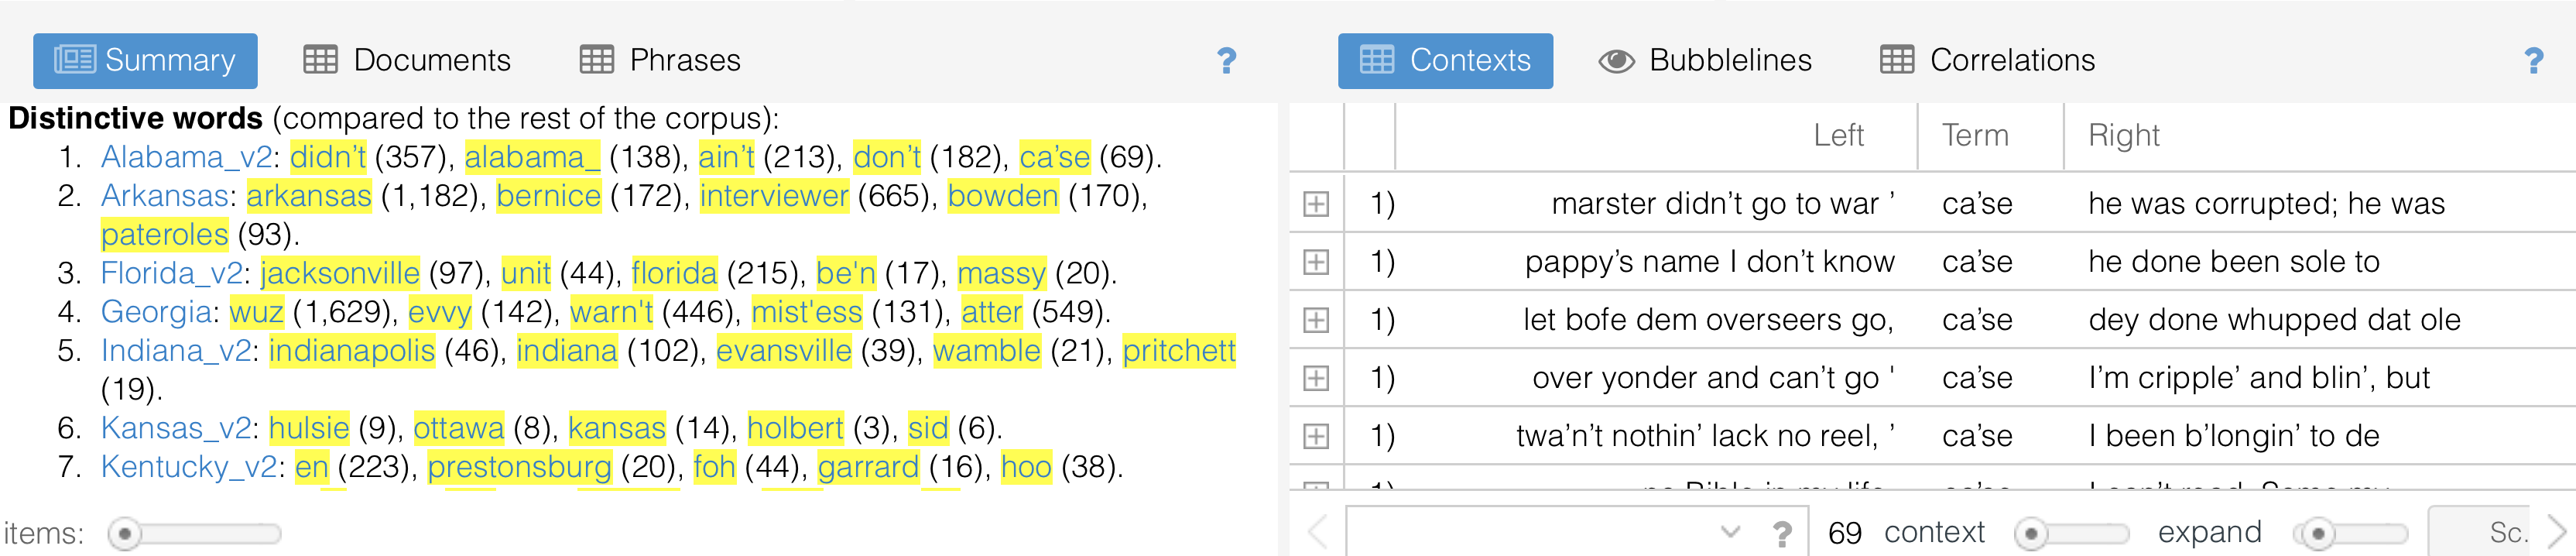 Snapshot of Interactivity Between Summary and Context Panels in Voyant